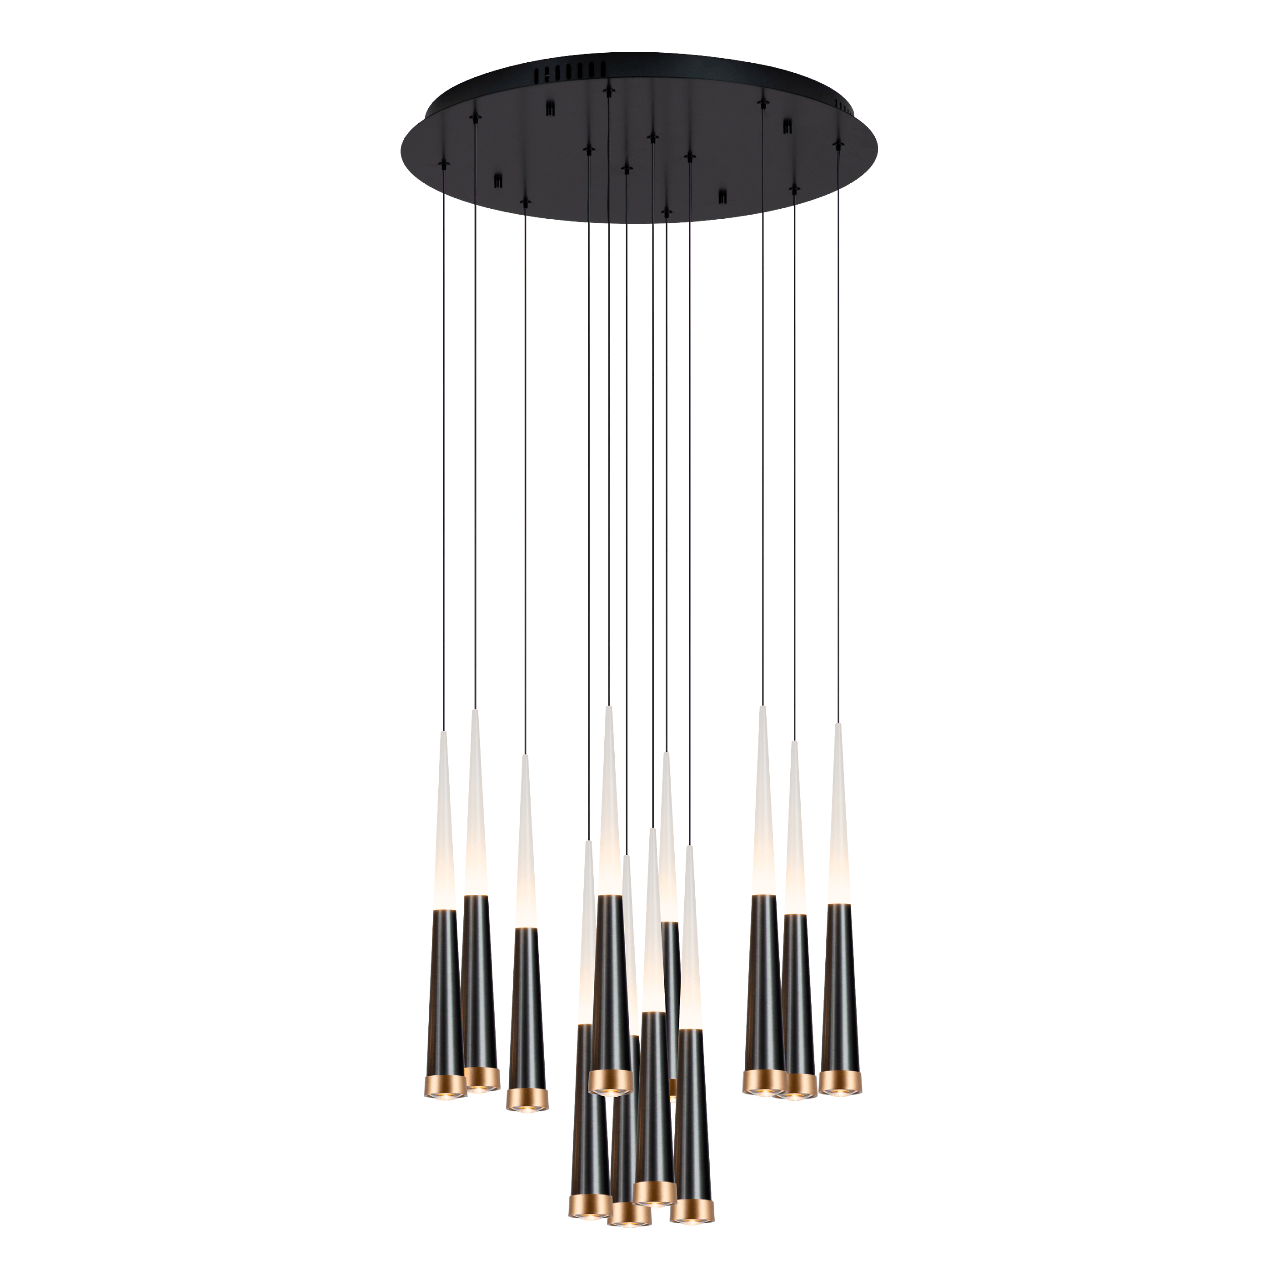 Pageone - Comet (12). Chandelier - Hbdepot